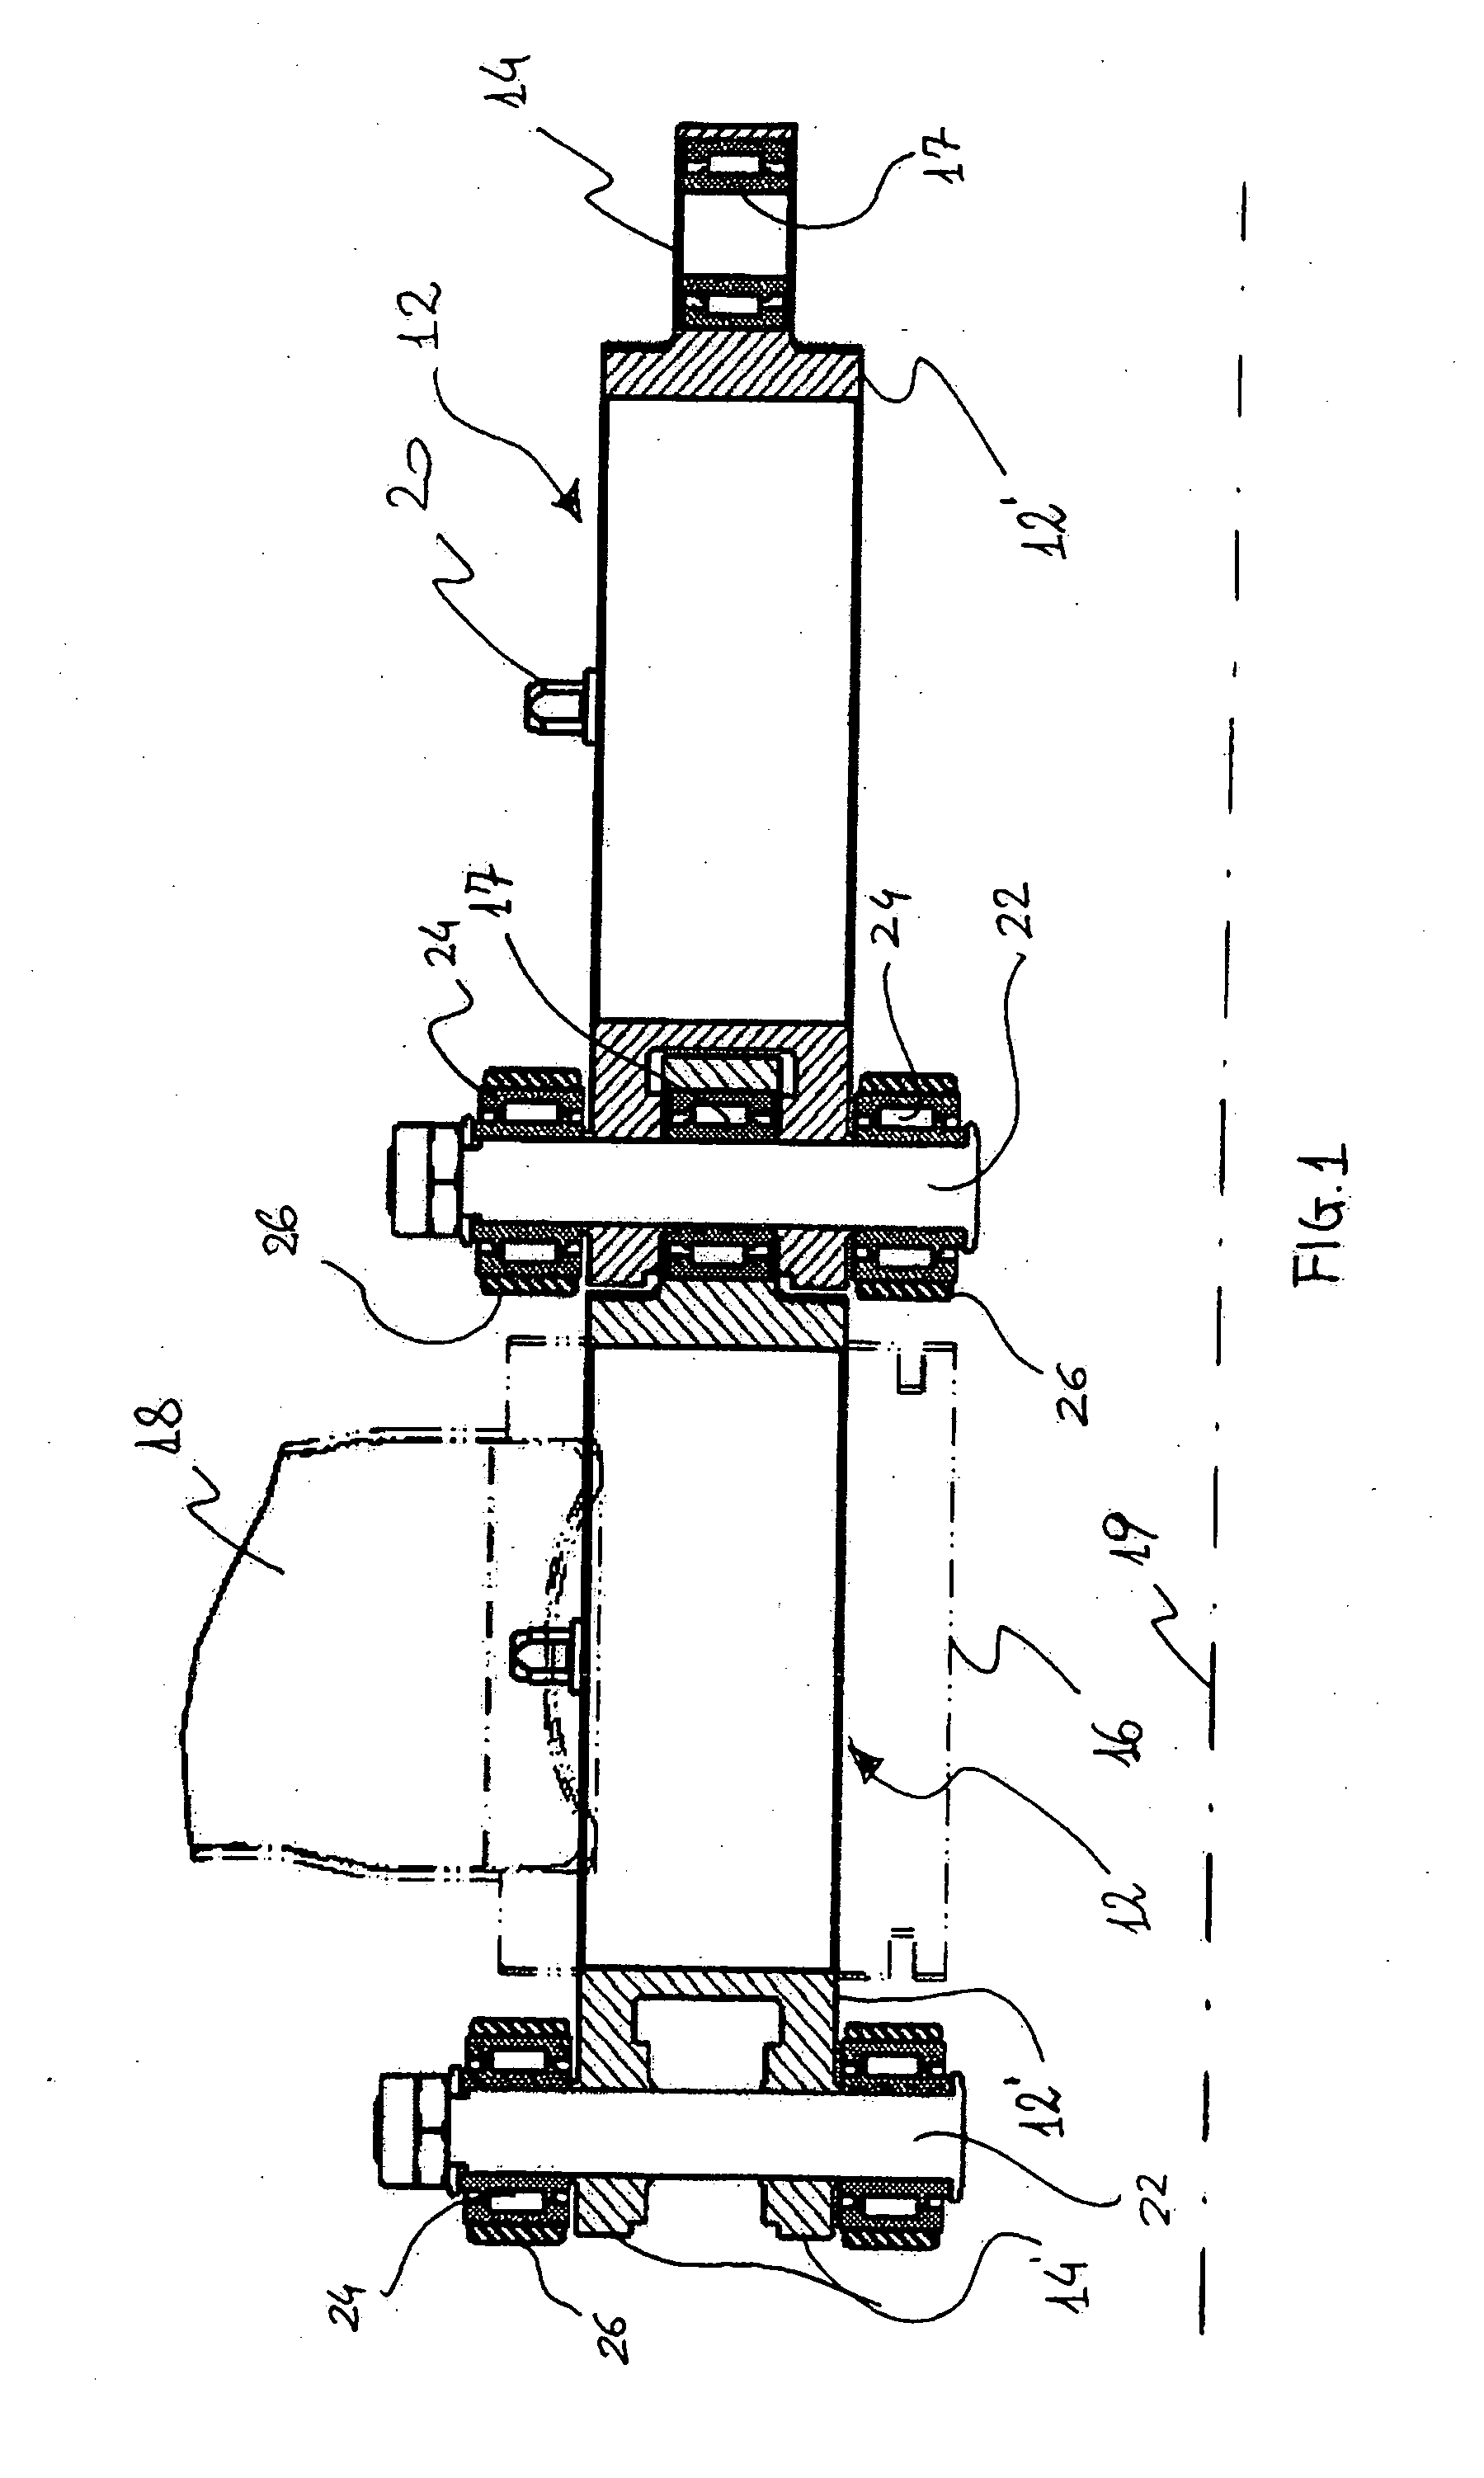 Apparatus for working on metal containers